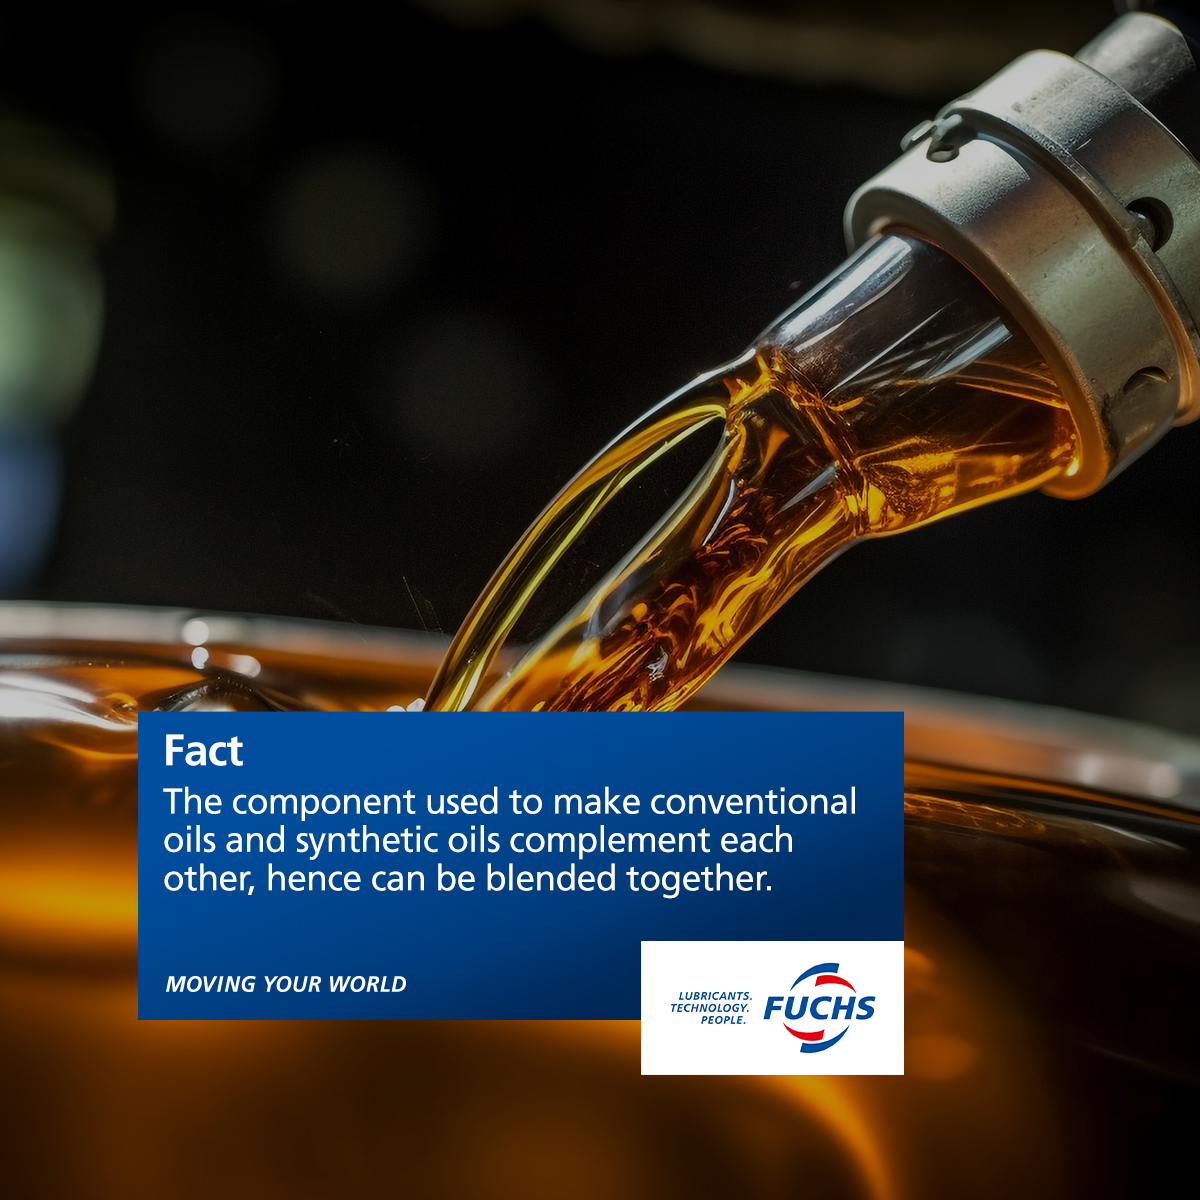 Your engine oil is crafted with precision and excellence to protect your engine. So, relax as you enjoy the smoothness of your drive. 

#FUCHS #FUCHSIndia #MovingYourWorld #EngineOils #Mythandfact